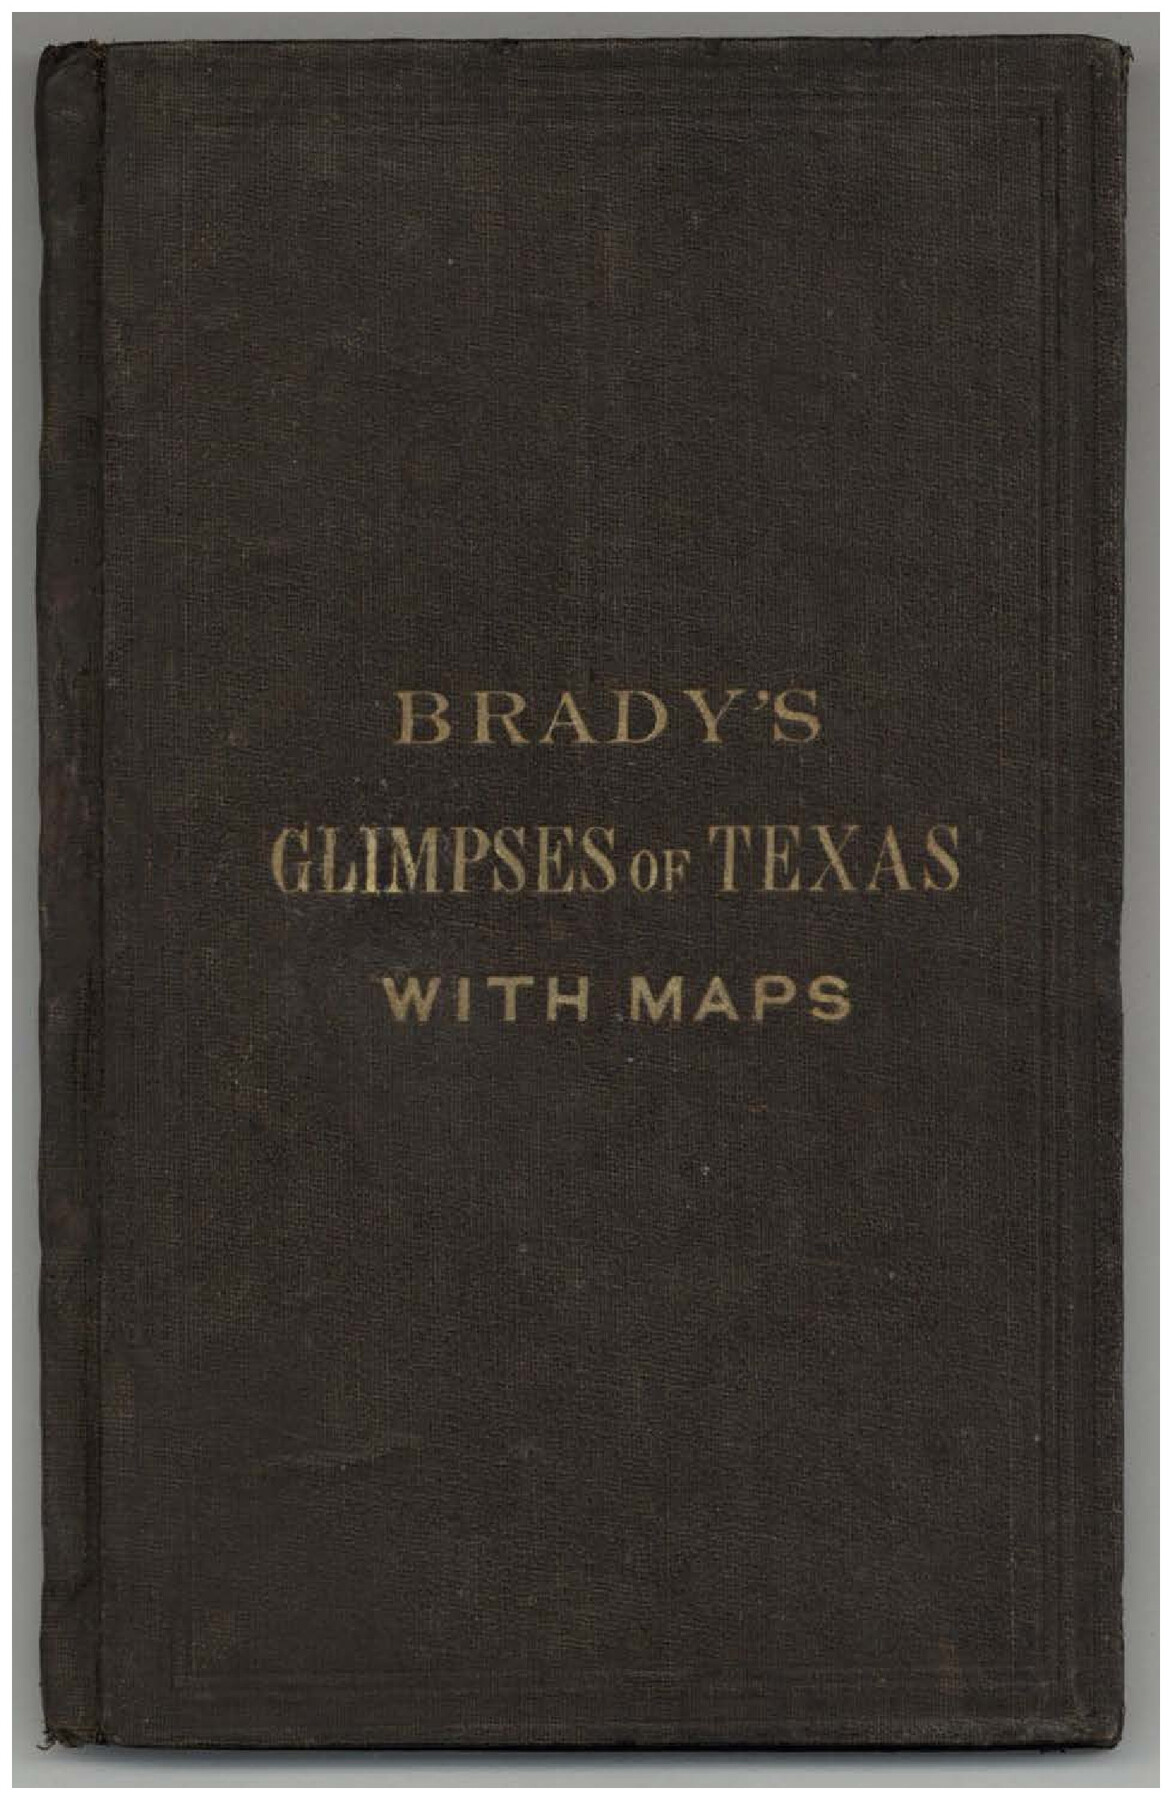 93918, Brady's Glimpses of Texas with maps, Holcomb Digital Map Collection